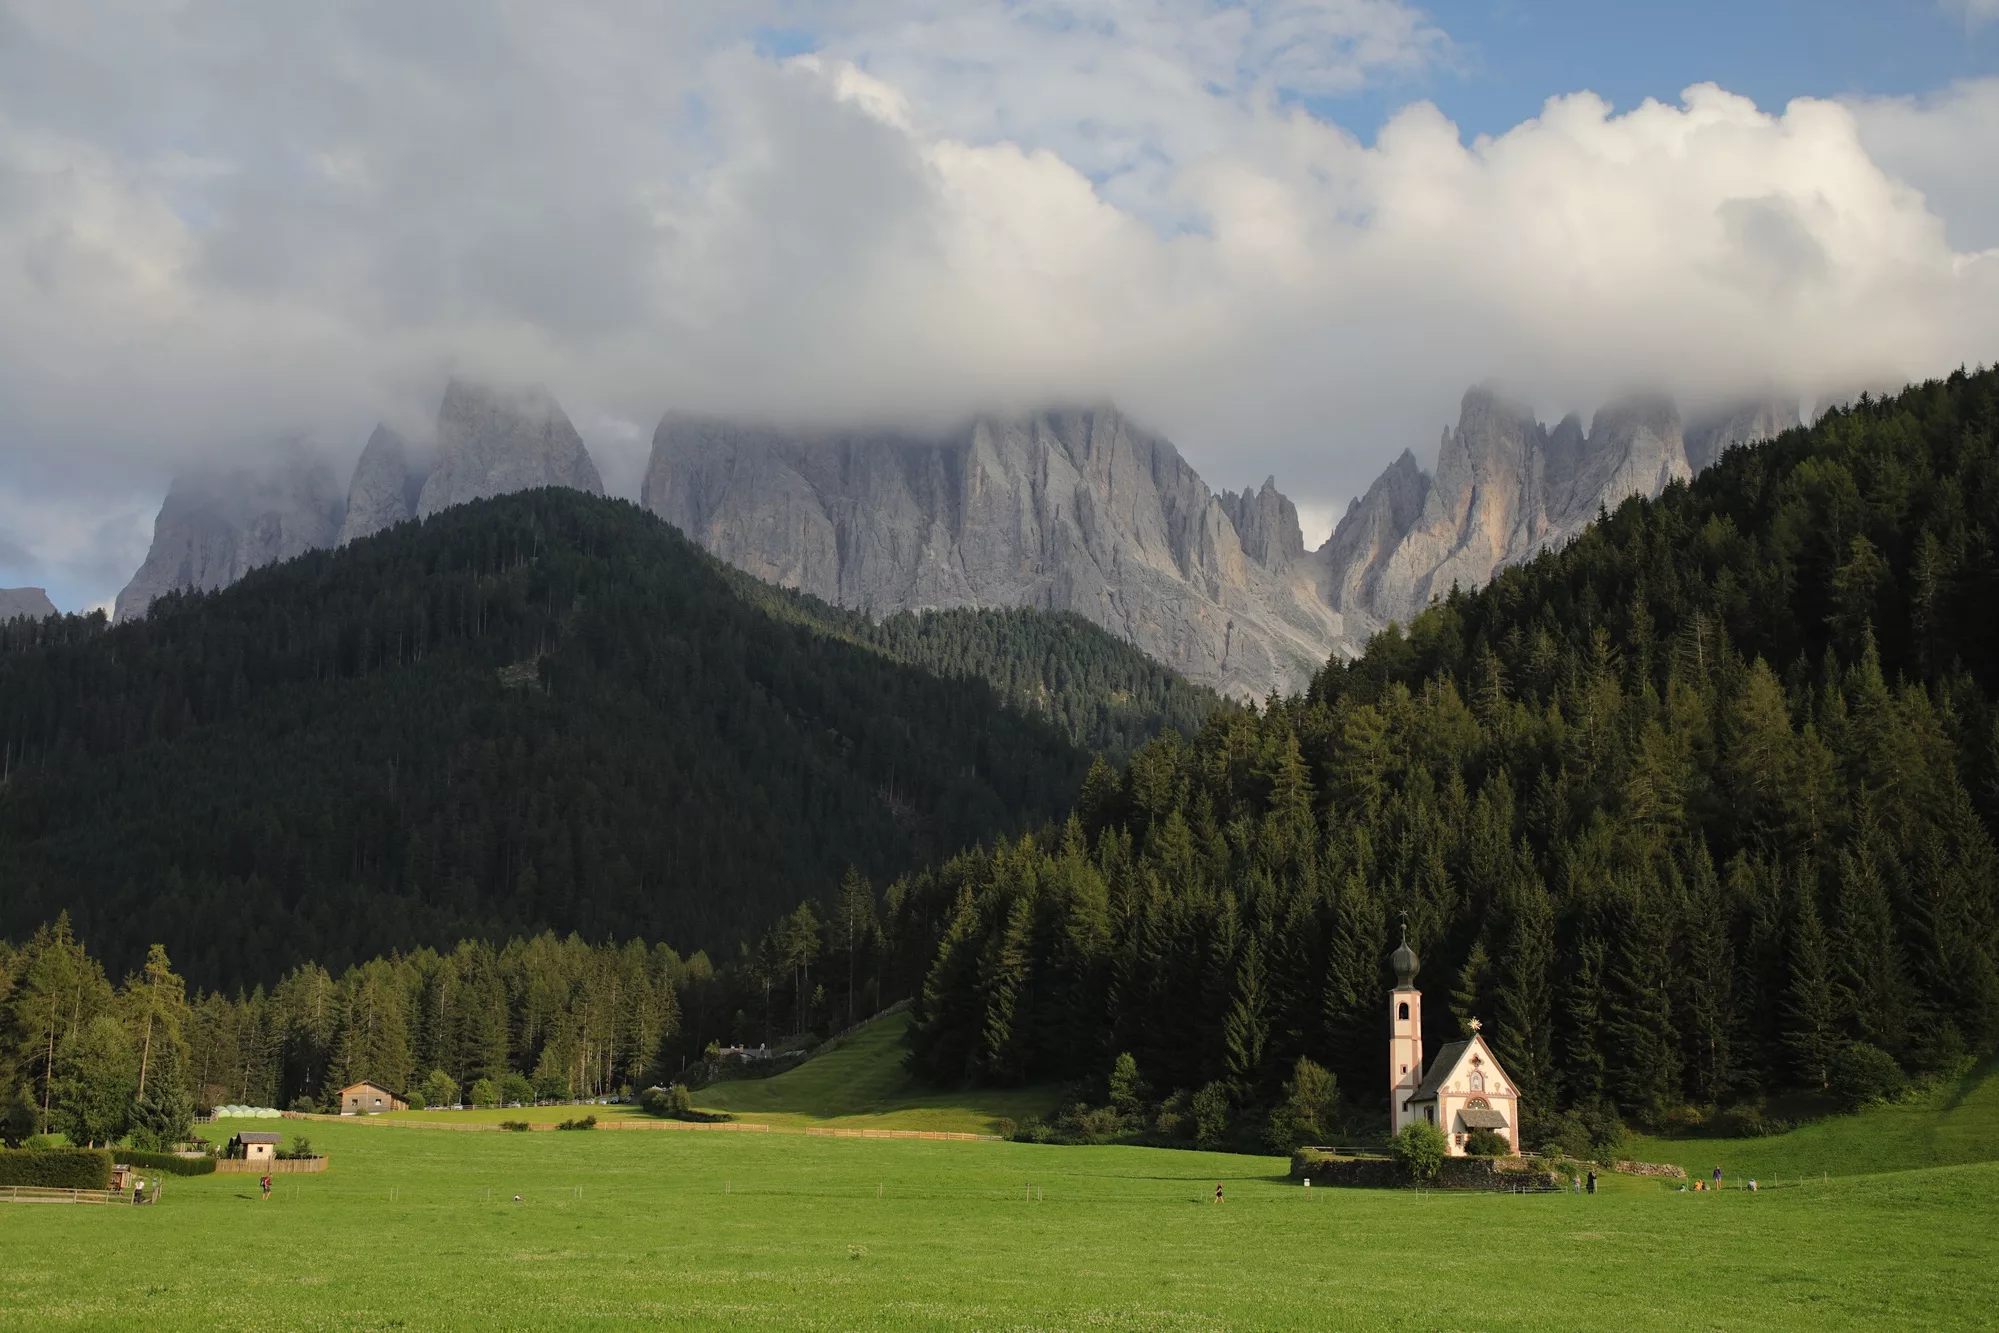 Venice and the Dolomites Photo tour with Don Mammoser - tiny chapel